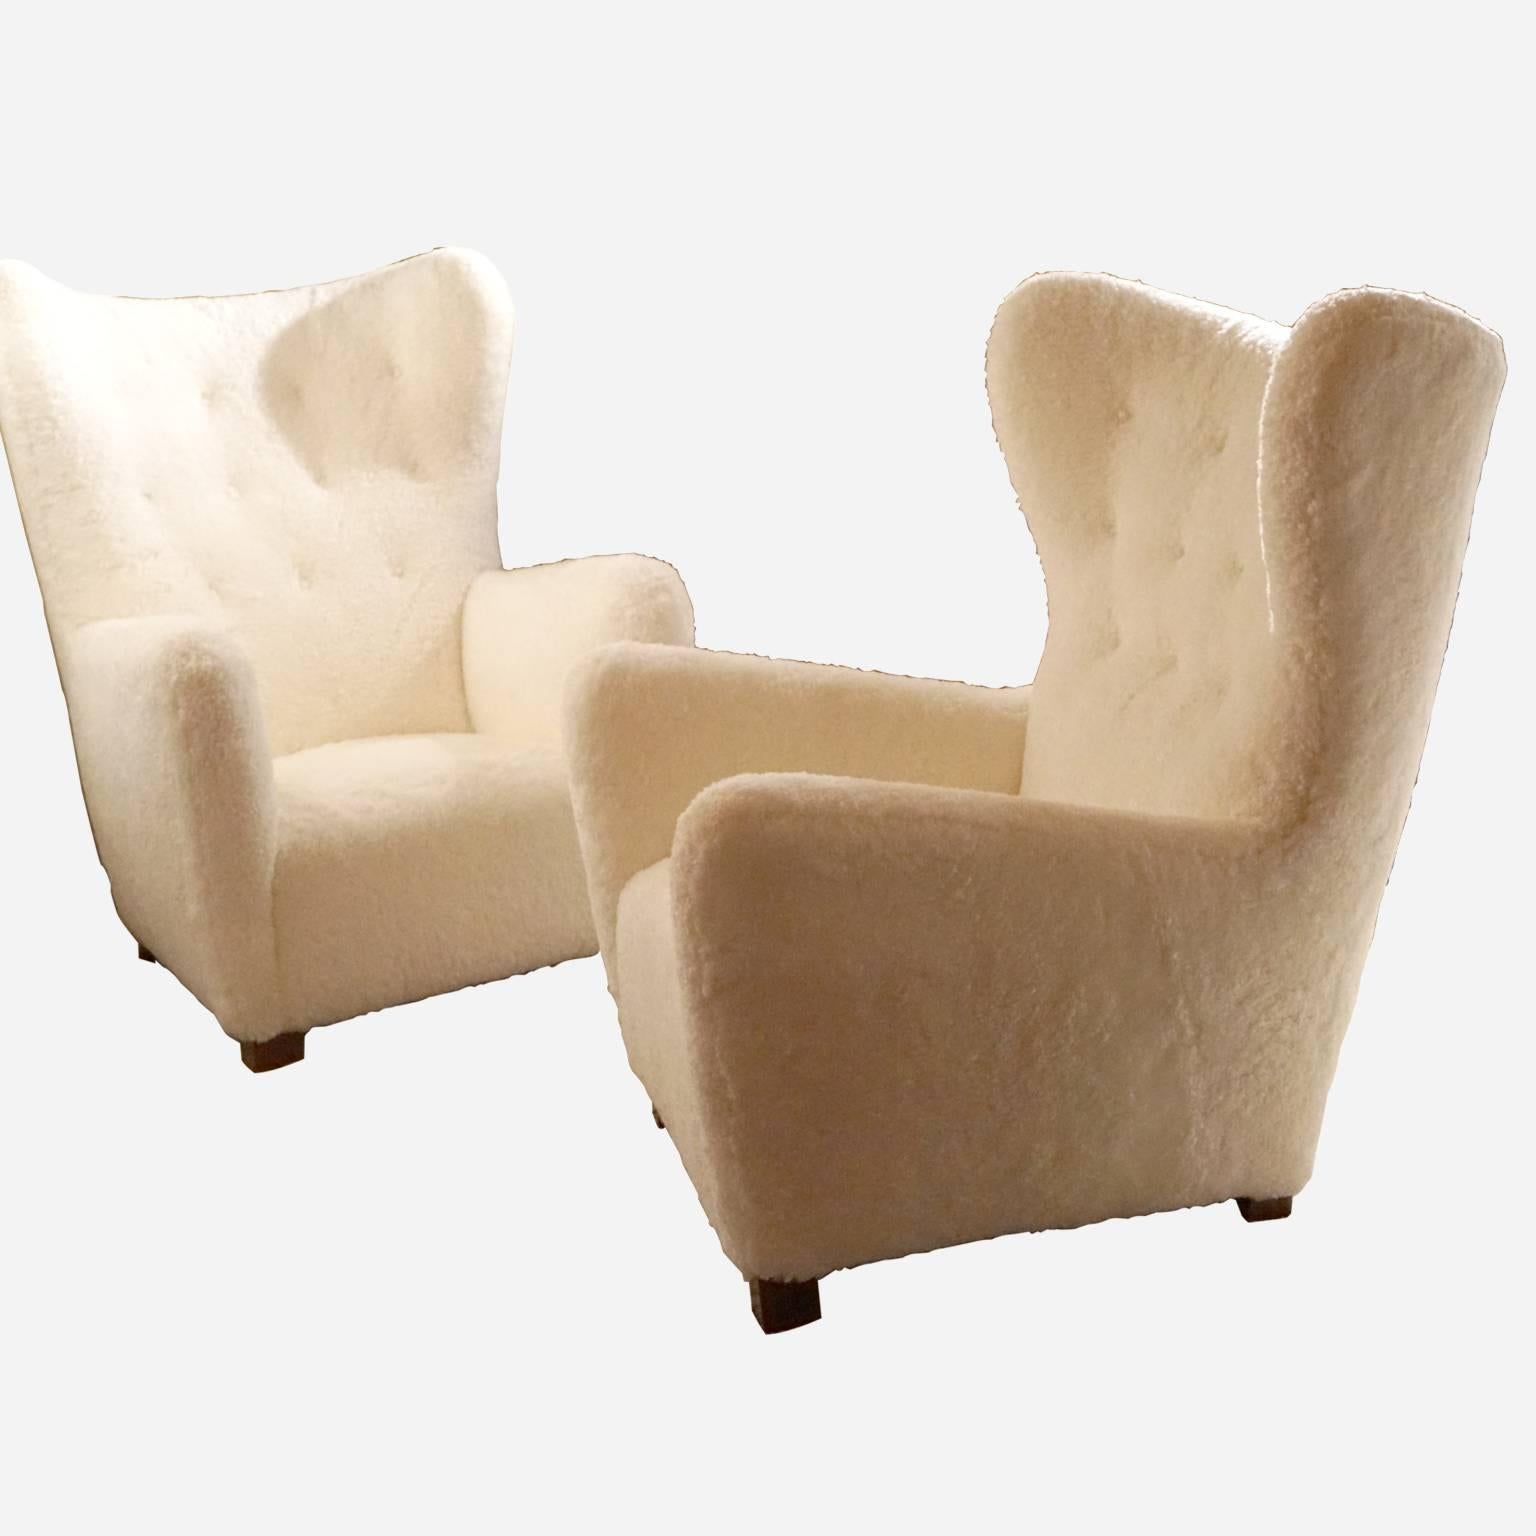 Danish One Wingback Lounge Chair by Fritz Hansen, White Sheep Skin, 1940s For Sale